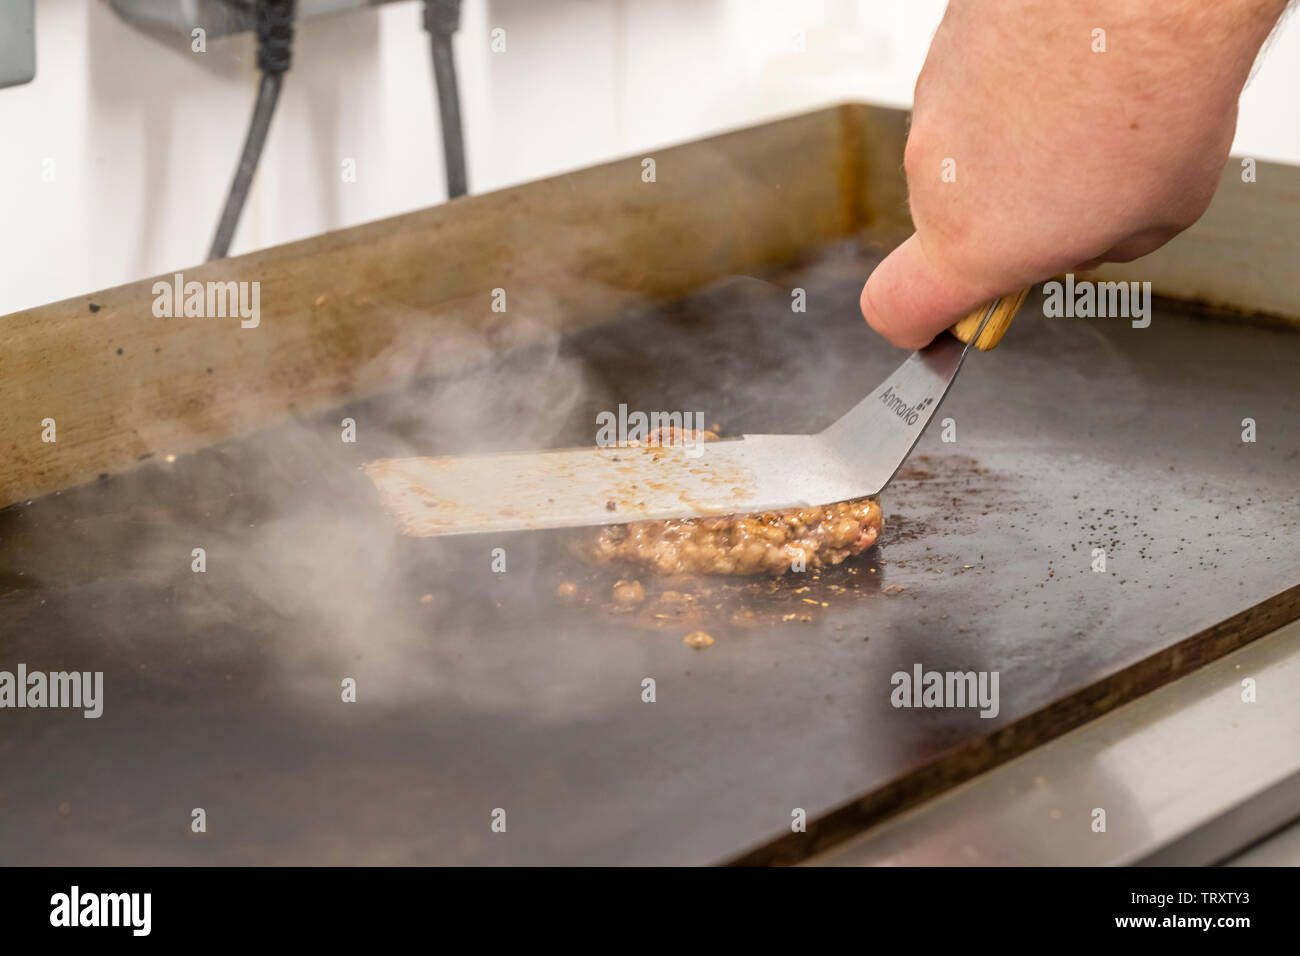 Putting together the Pig & Apple Burger at The Pig & Apple cafe. The cafe is based at Humble by Nature, Monmouthshire, Wales. Stock Photo